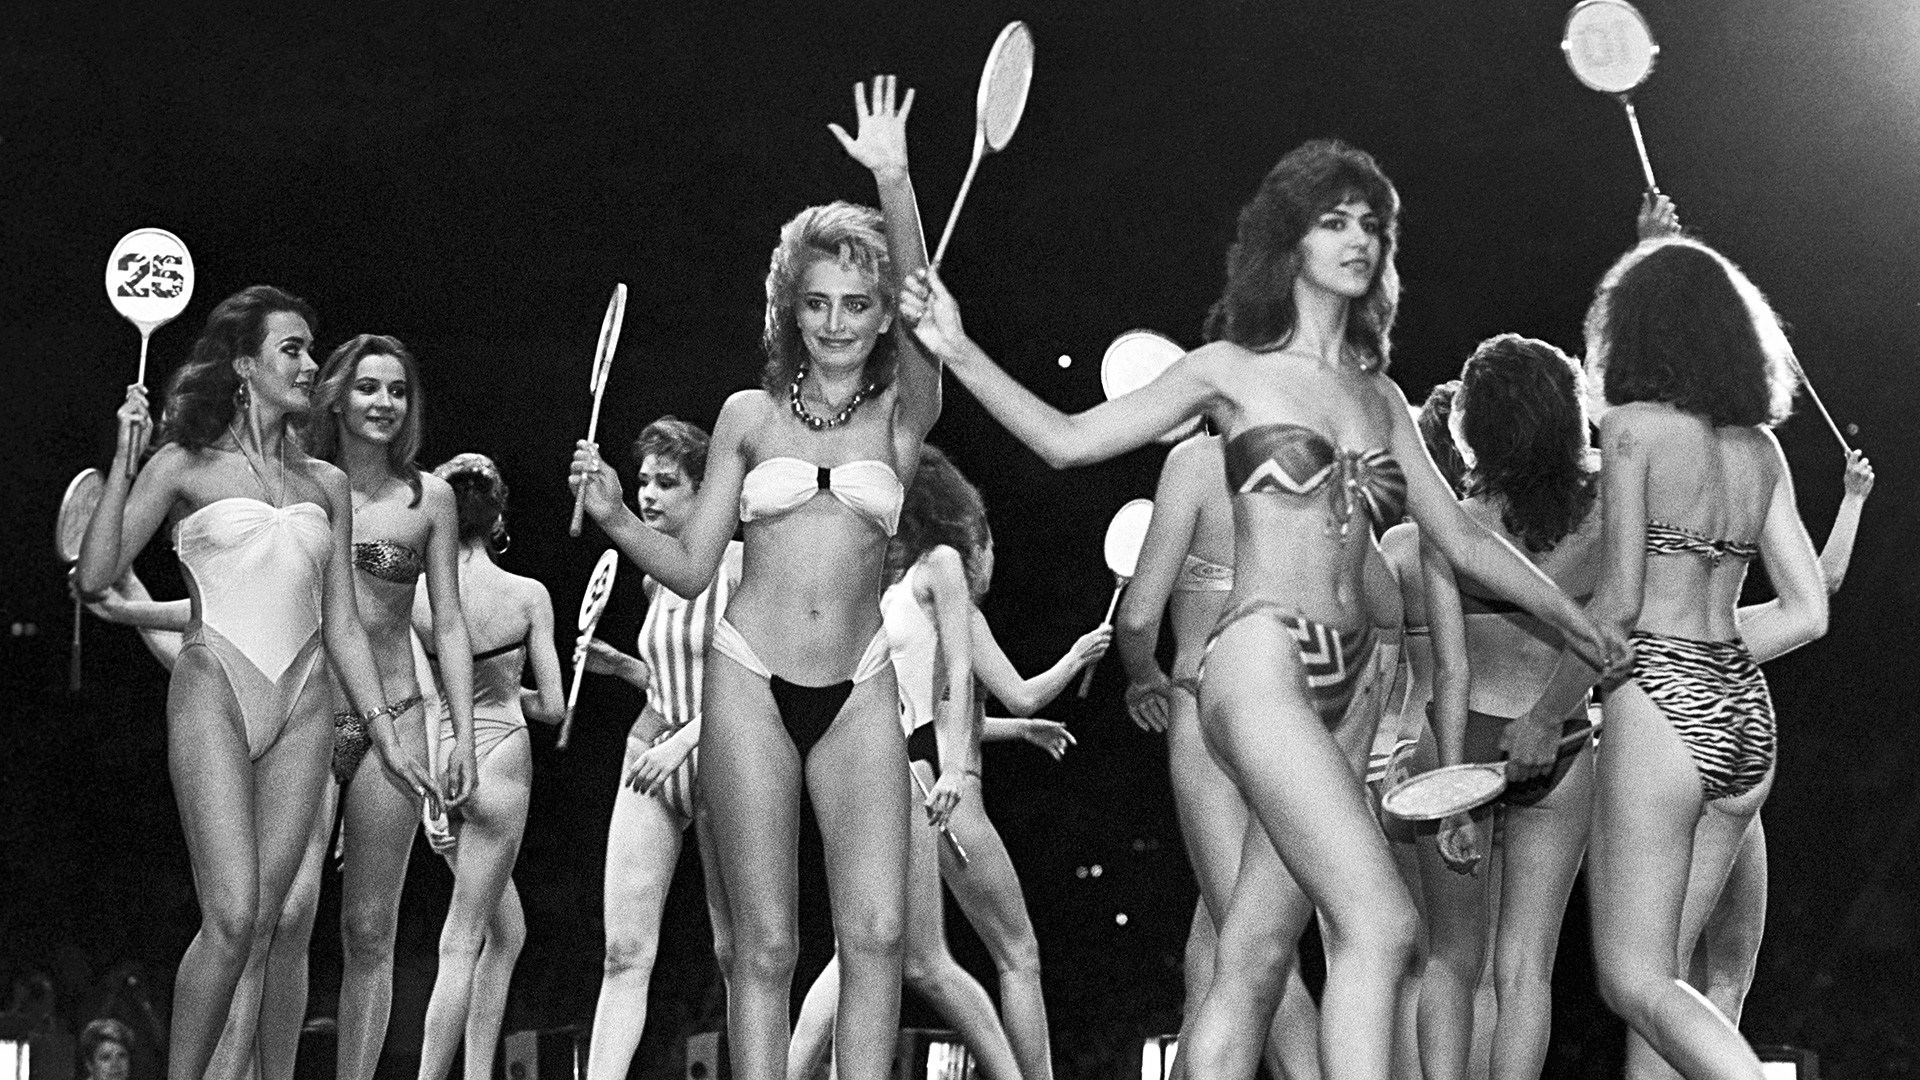 Naked Retro Singers of the Ussr (65 photos)